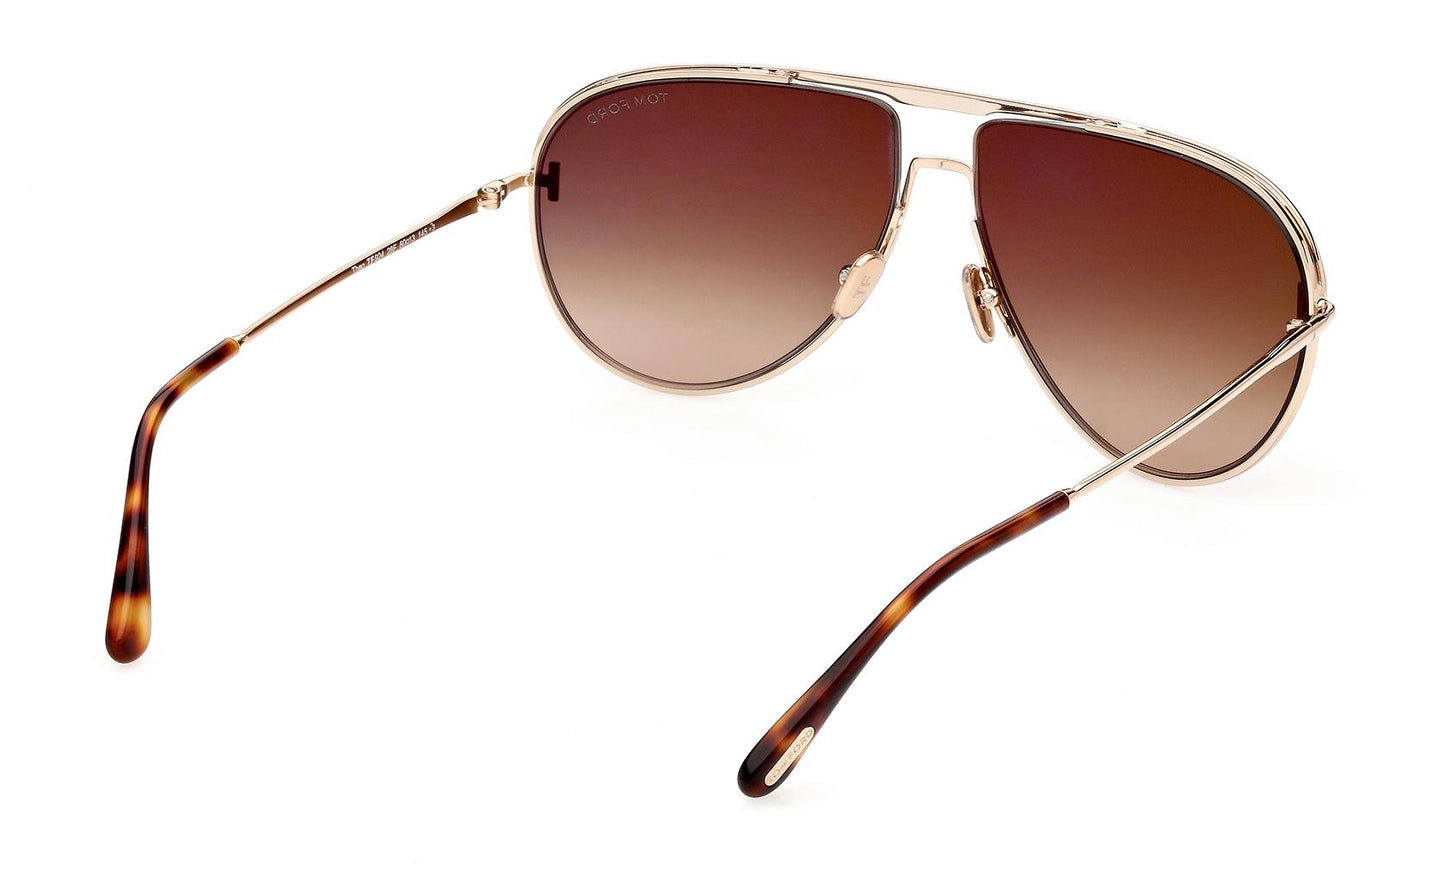 Load image into Gallery viewer, Tom Ford Theo Sunglasses FT0924 28F
